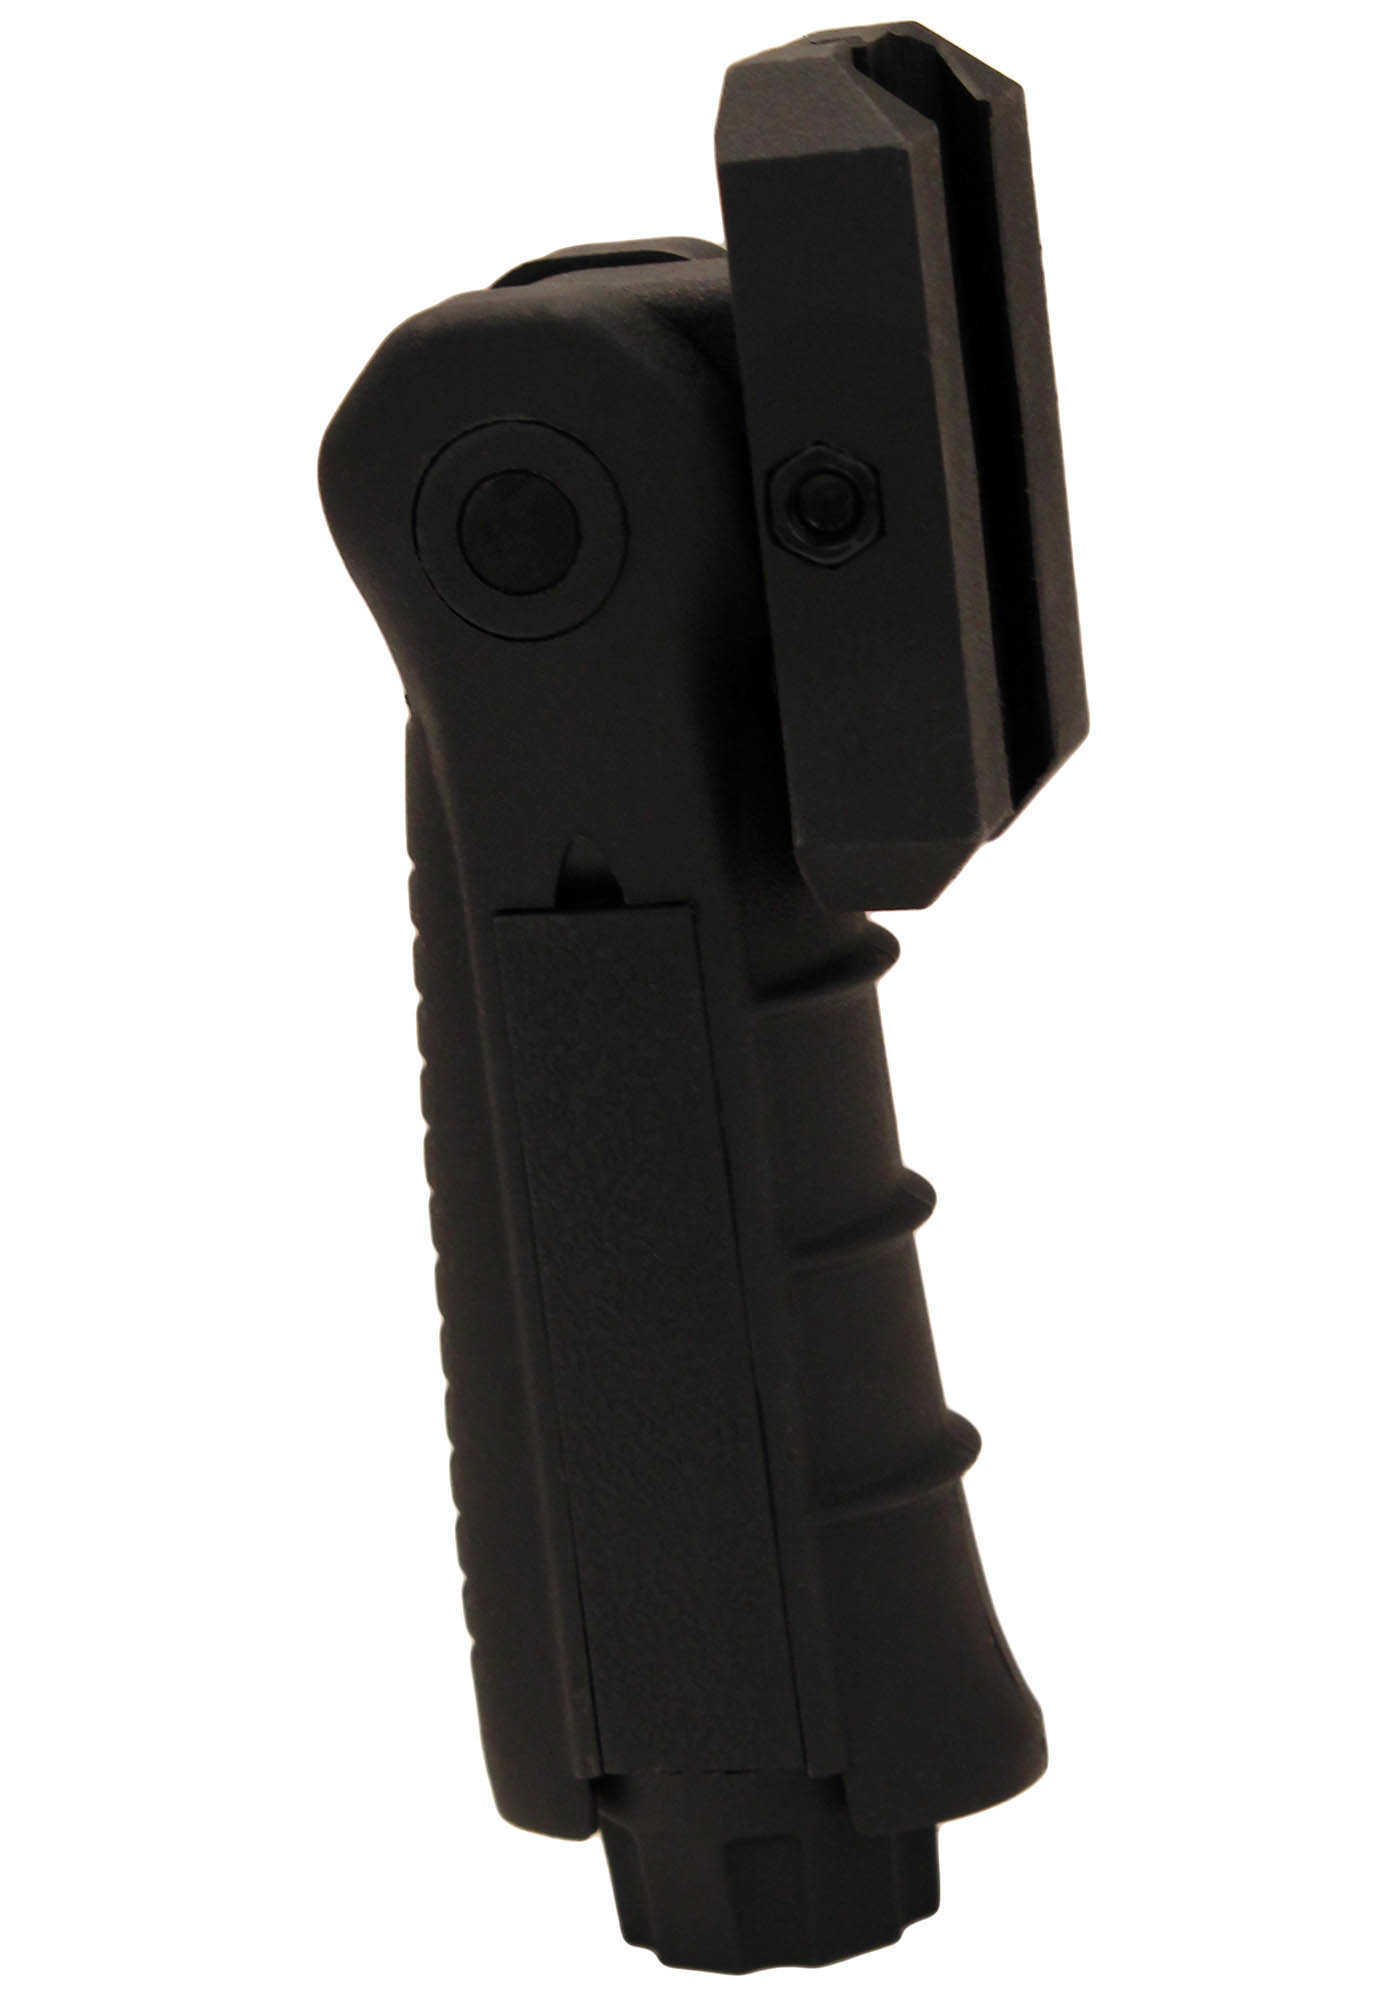 Leapers UTG 5-Position Foregrip, Black Md: RBFGRP170B